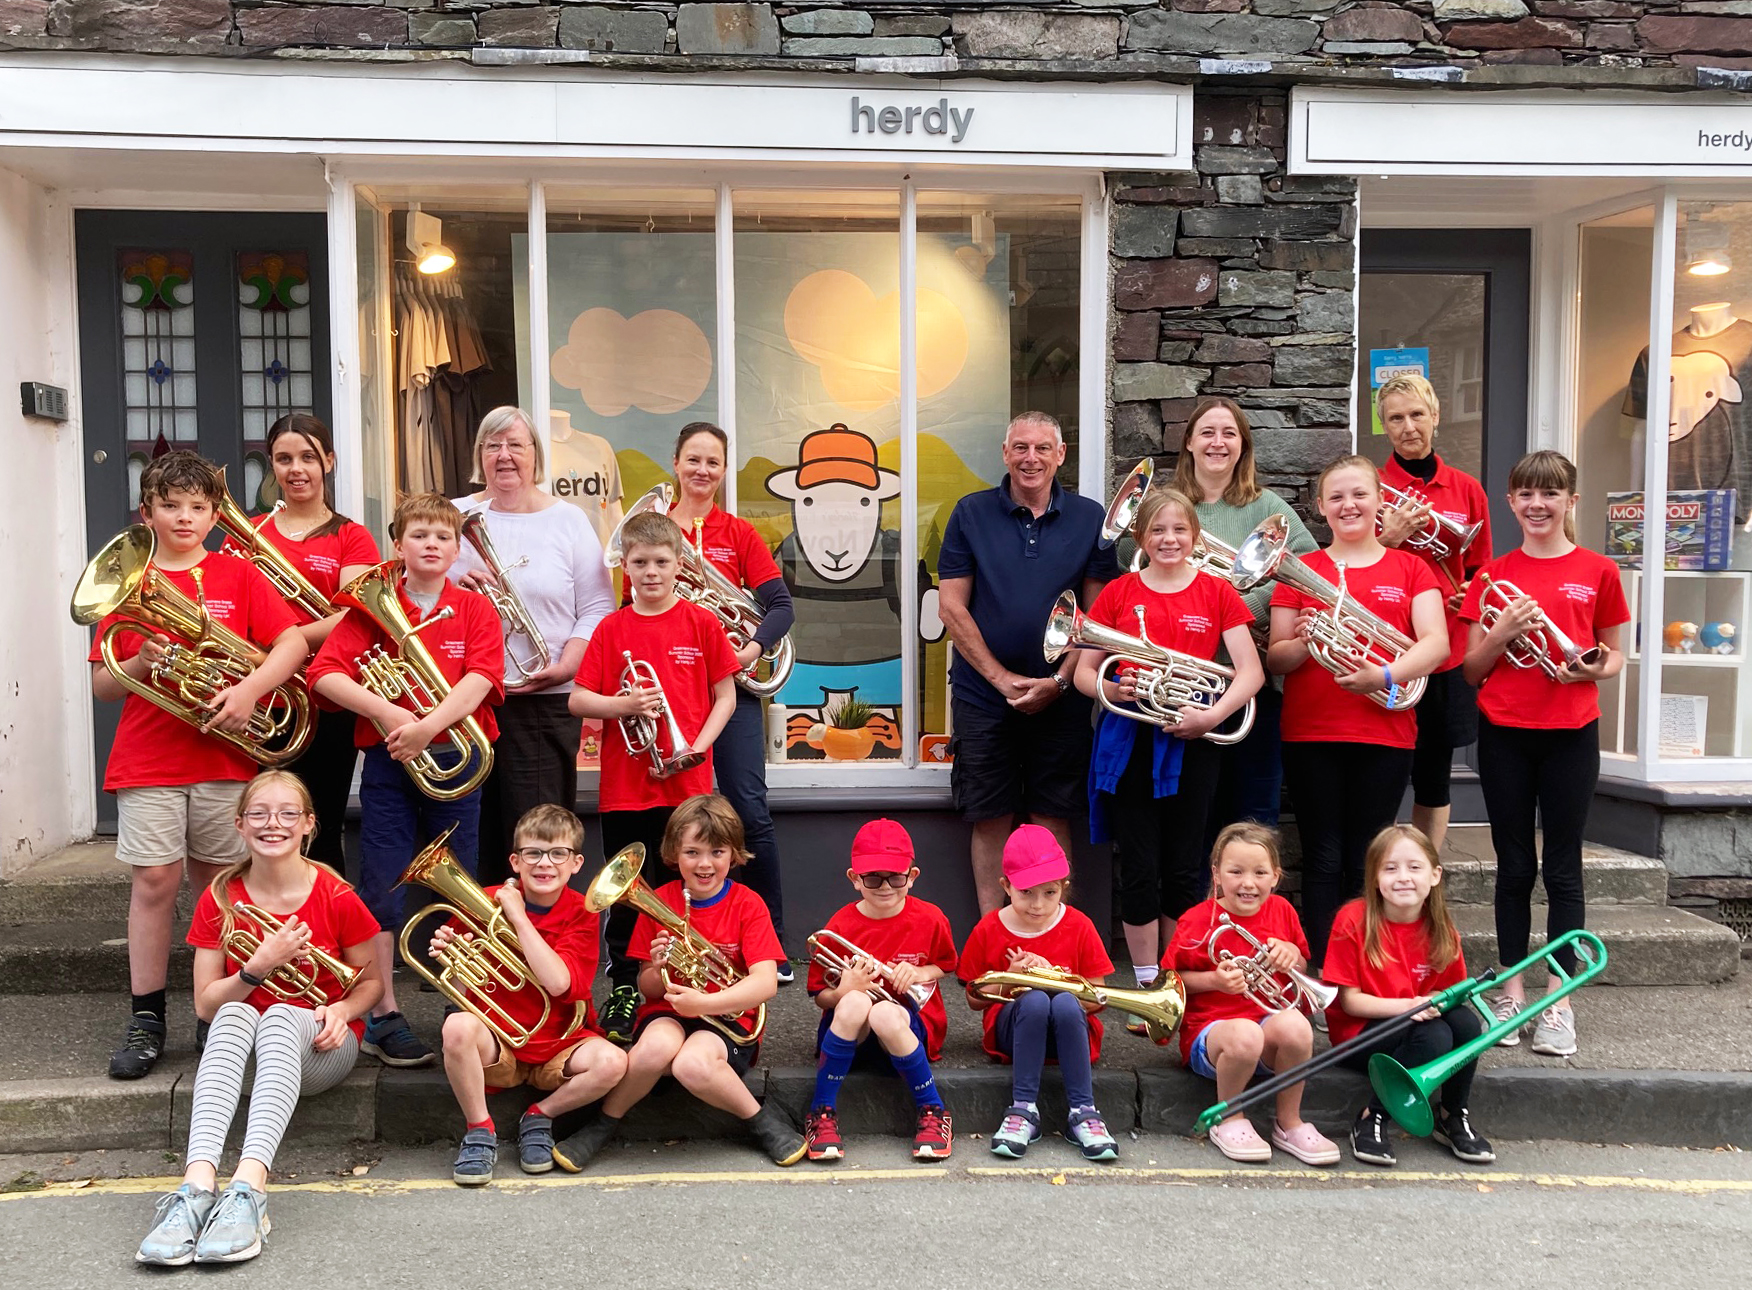 Grasmere Brass Band outside Herdy store Grasmere Lake District